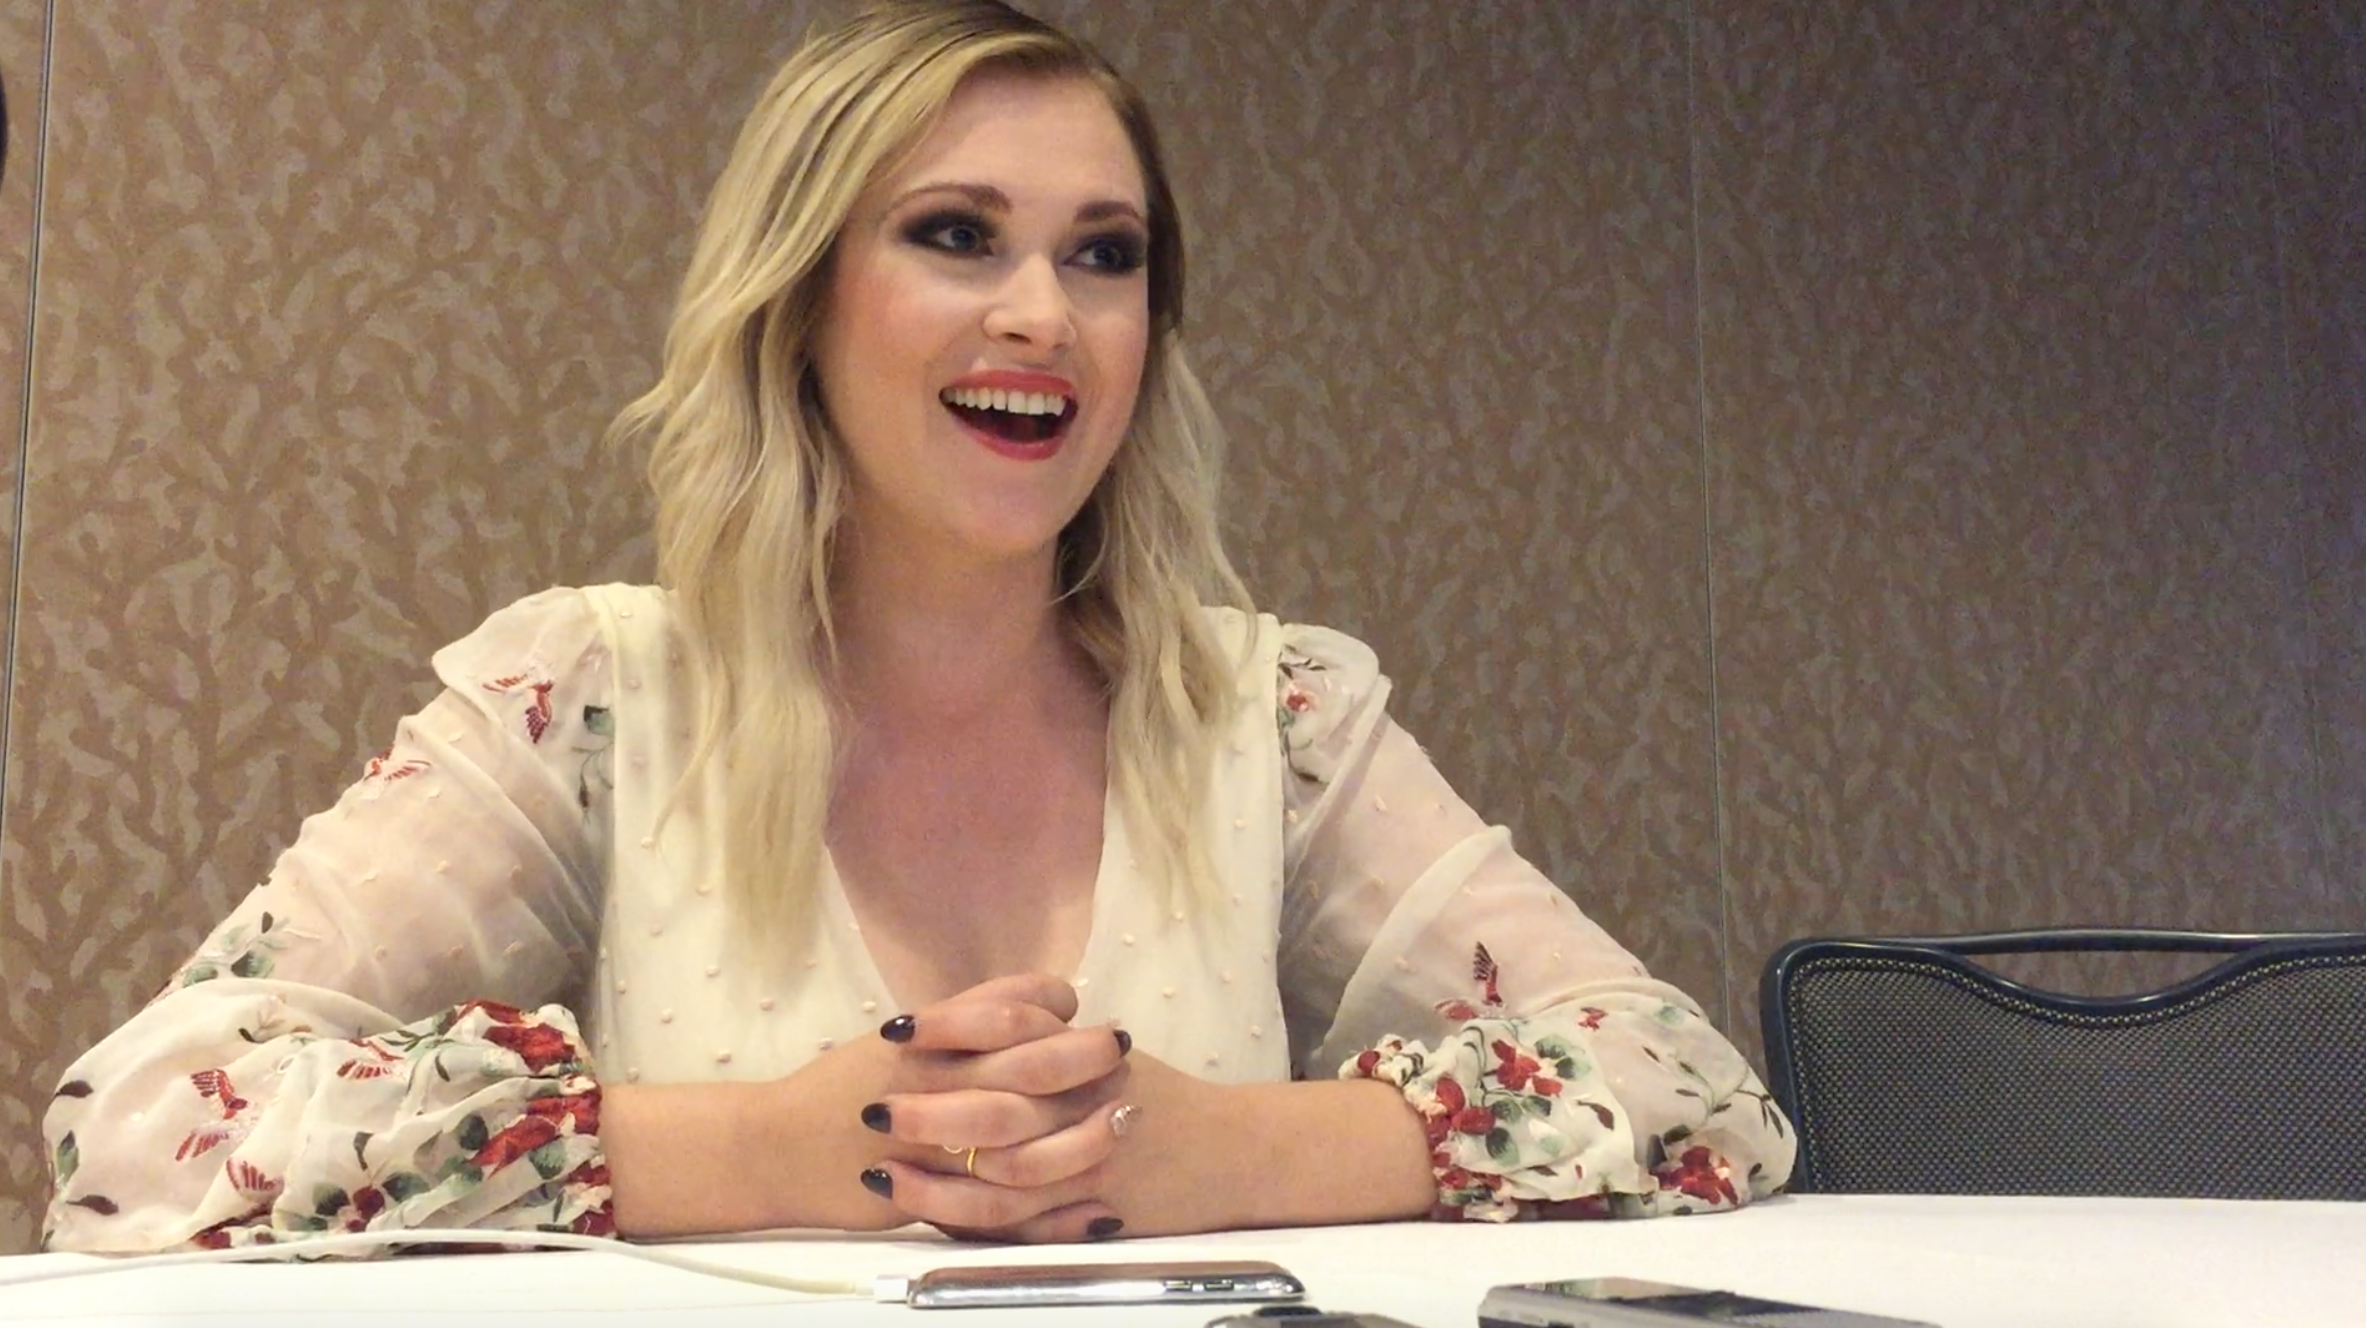 Photo of SDCC 2016: ‘The 100’ Star Eliza Taylor Chats About Clarke’s Isolation in Season 3, Lexa’s Final Goodbye & Hopes for Season 4